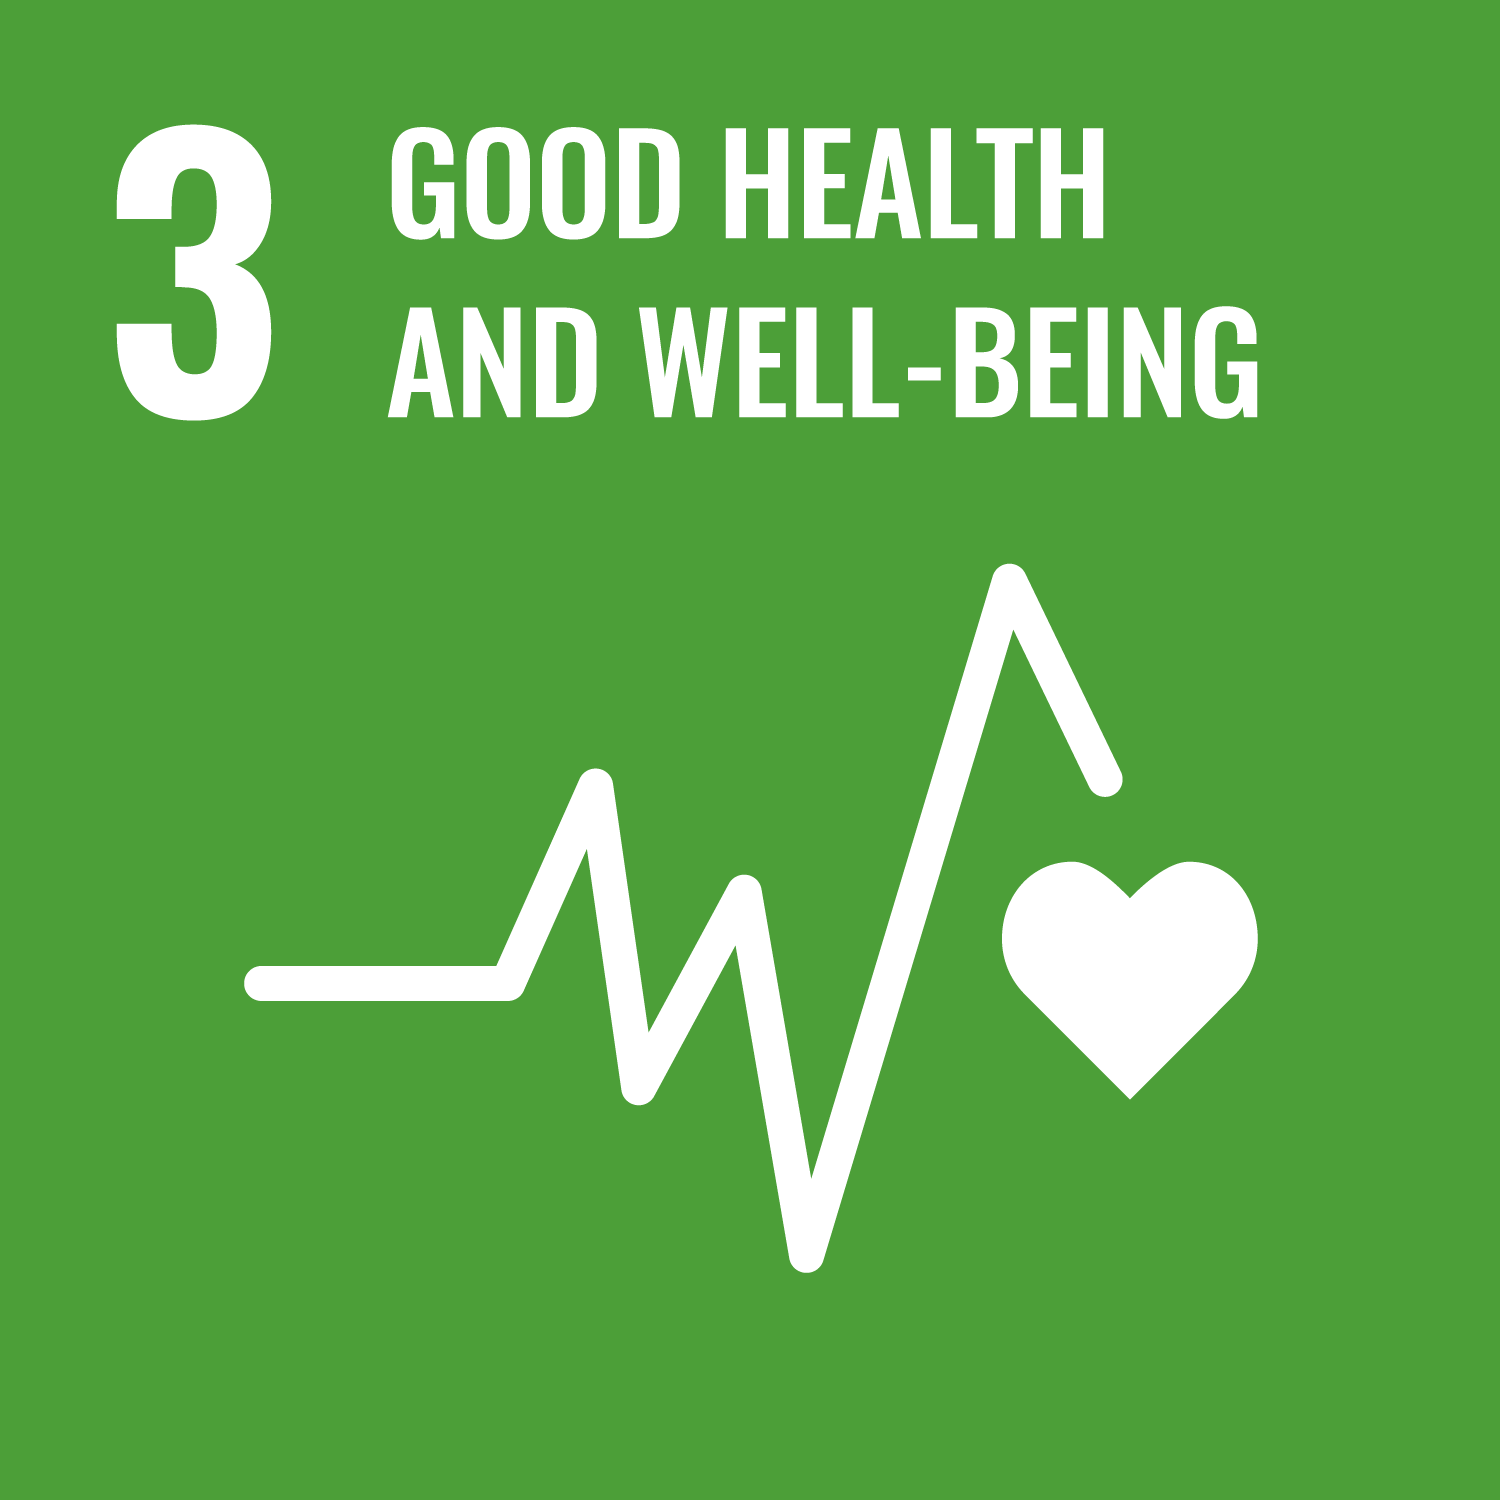 SDG Goal 3: Good Health and Well-being